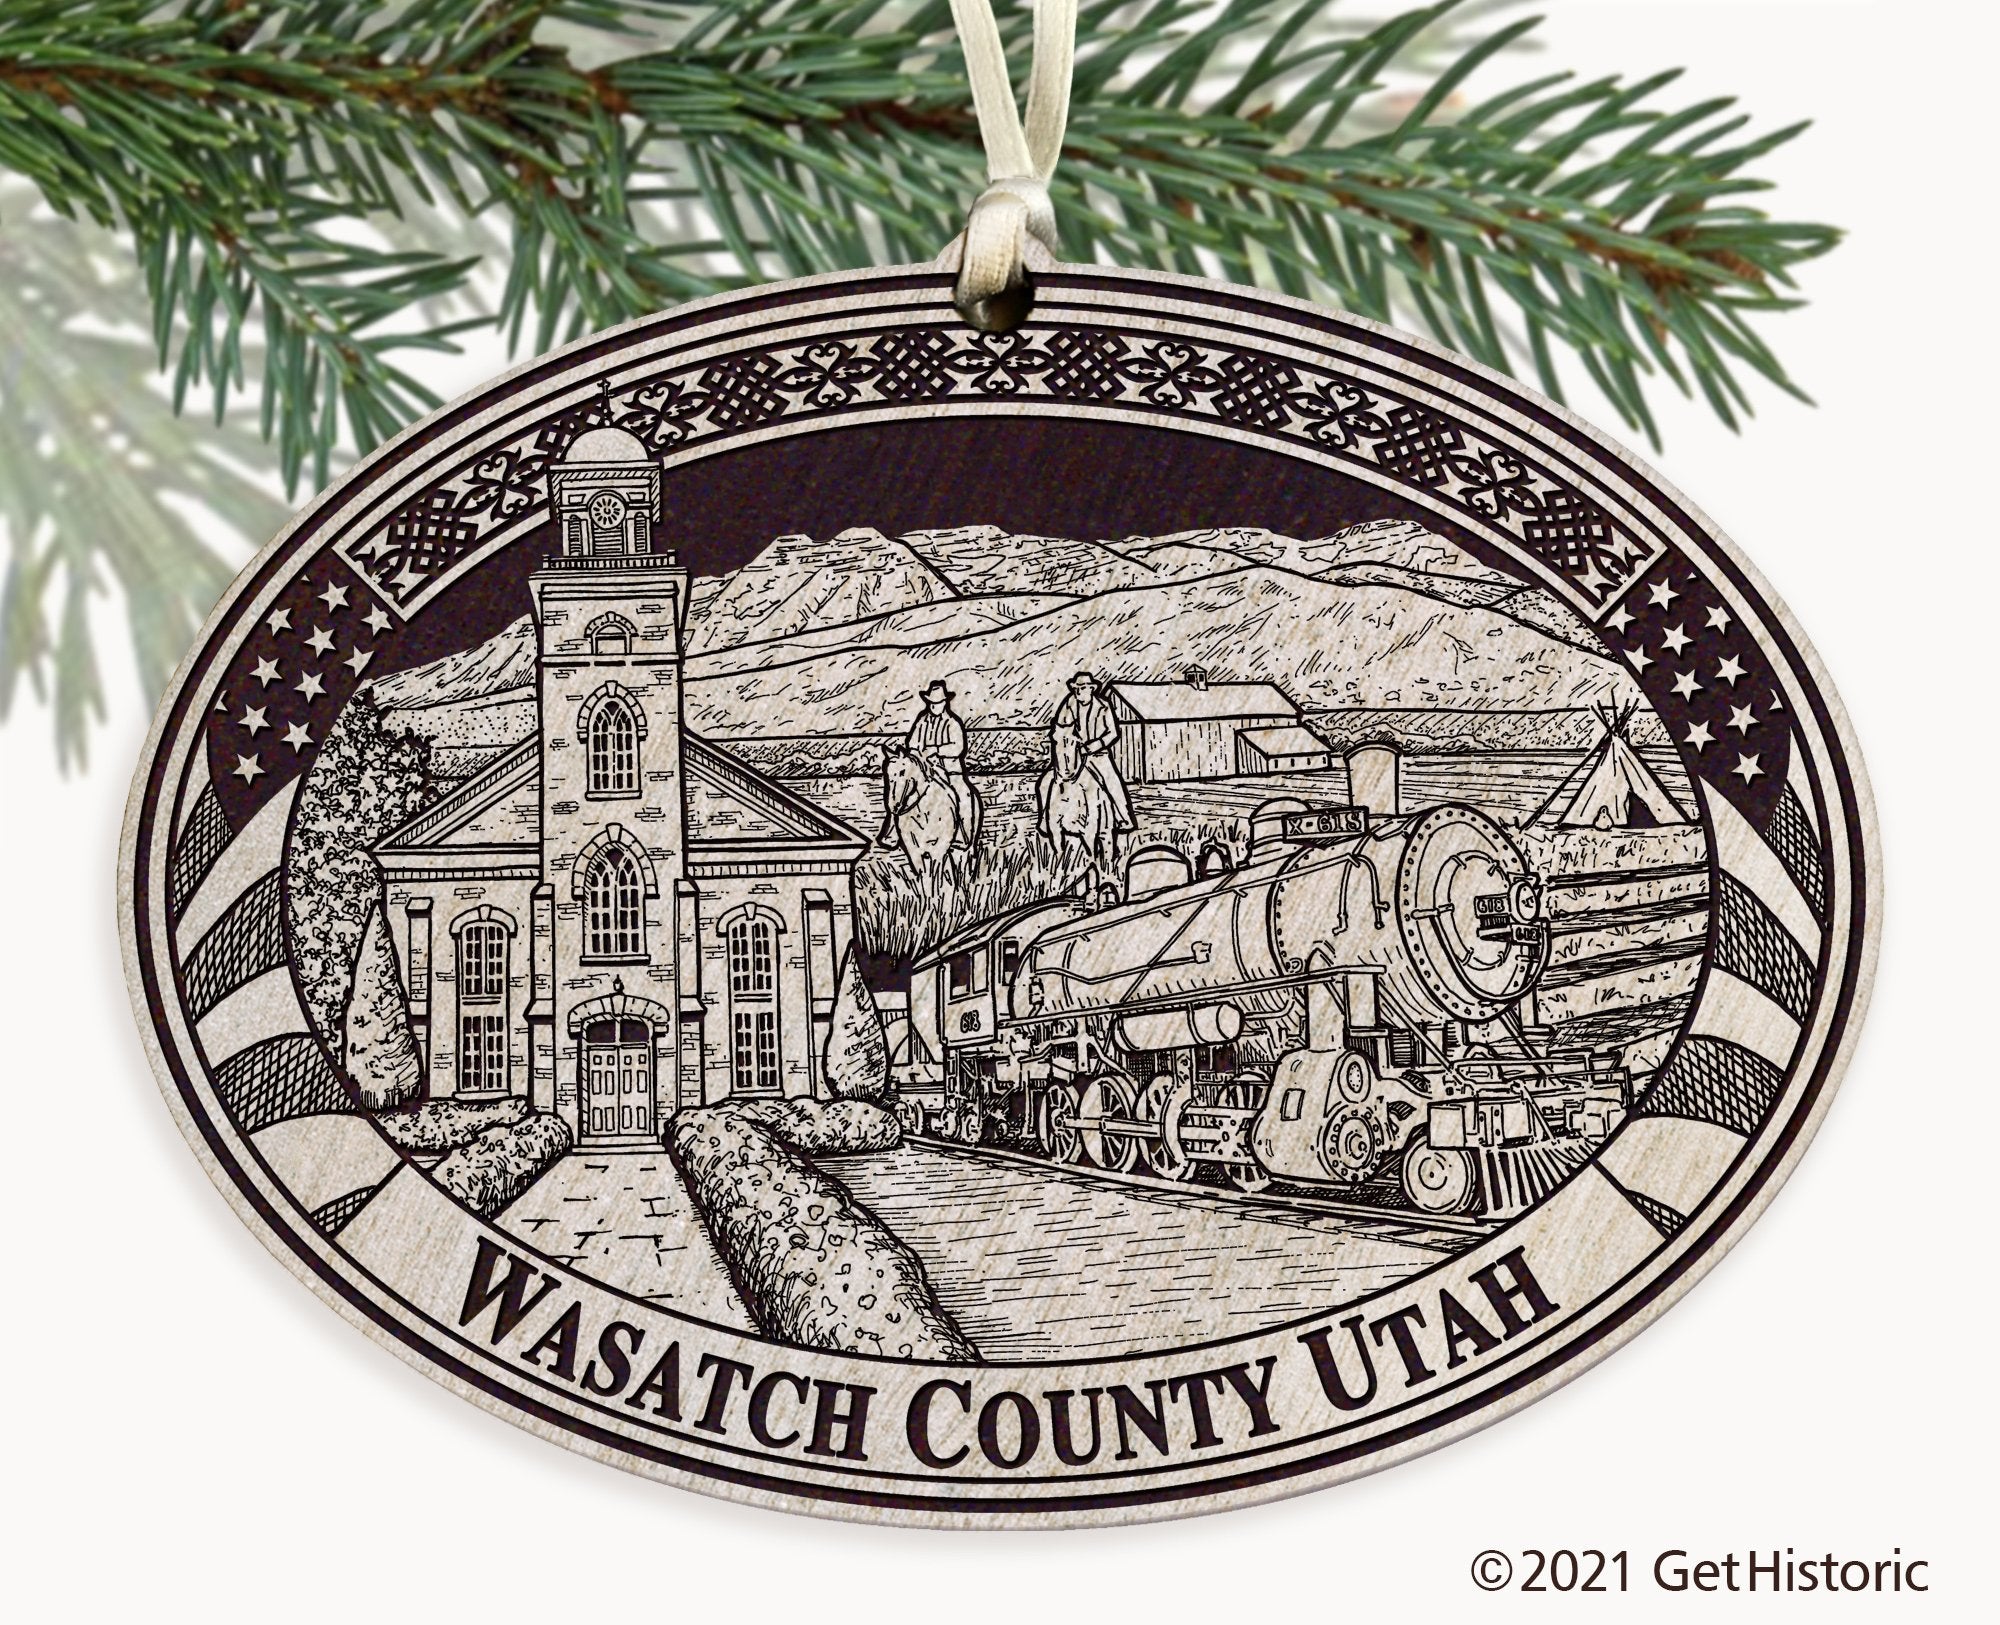 Wasatch County Utah Engraved Ornament